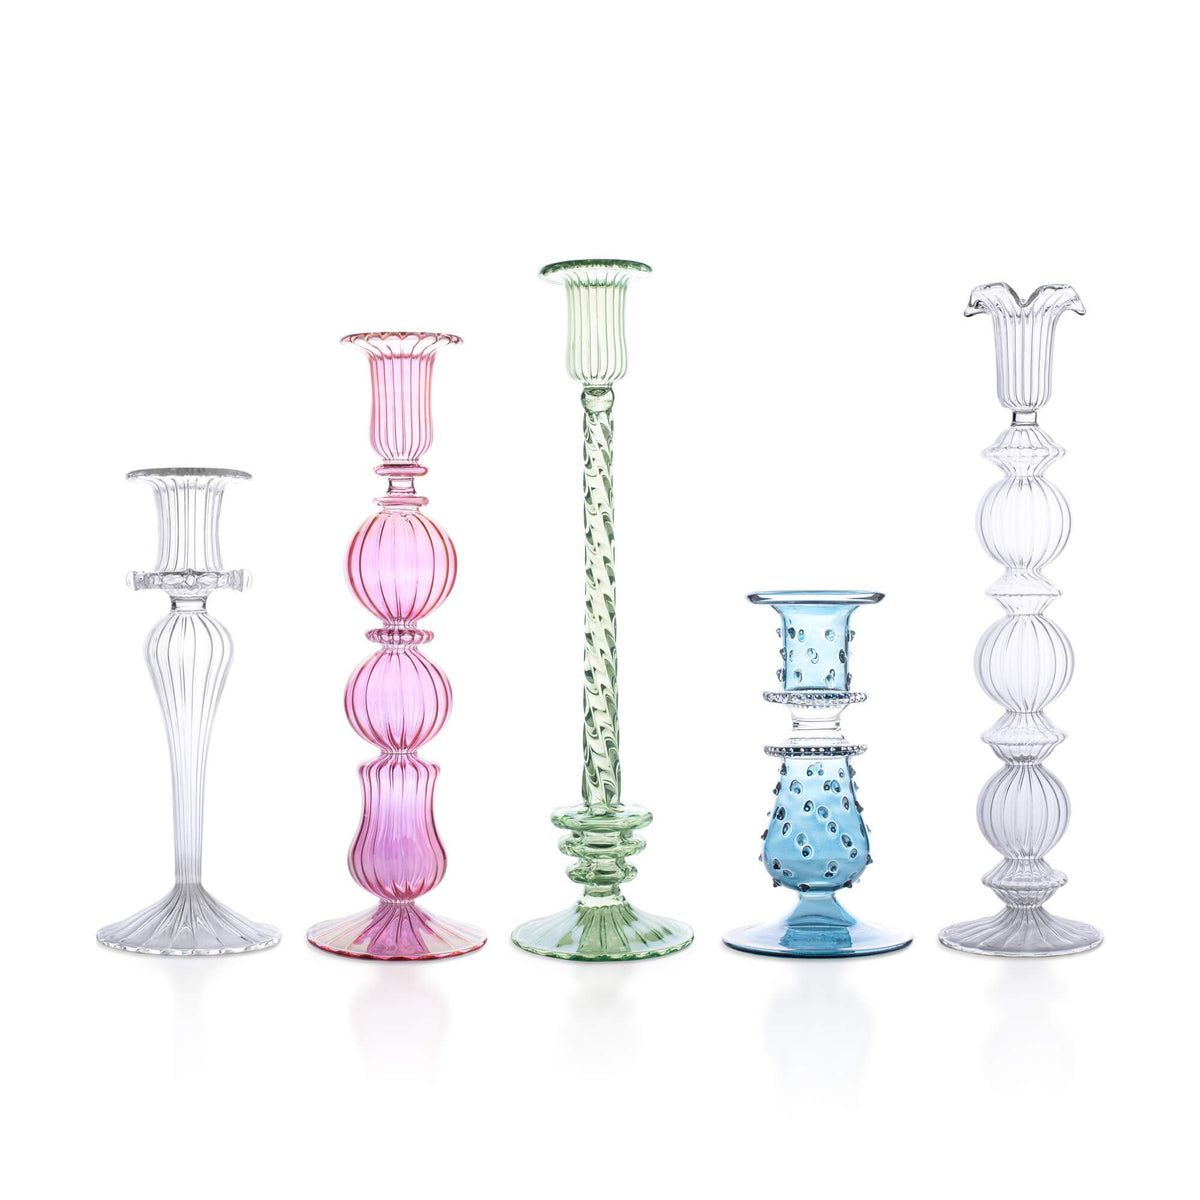 Issy Granger coloured glass candlesticks, glass candle holders